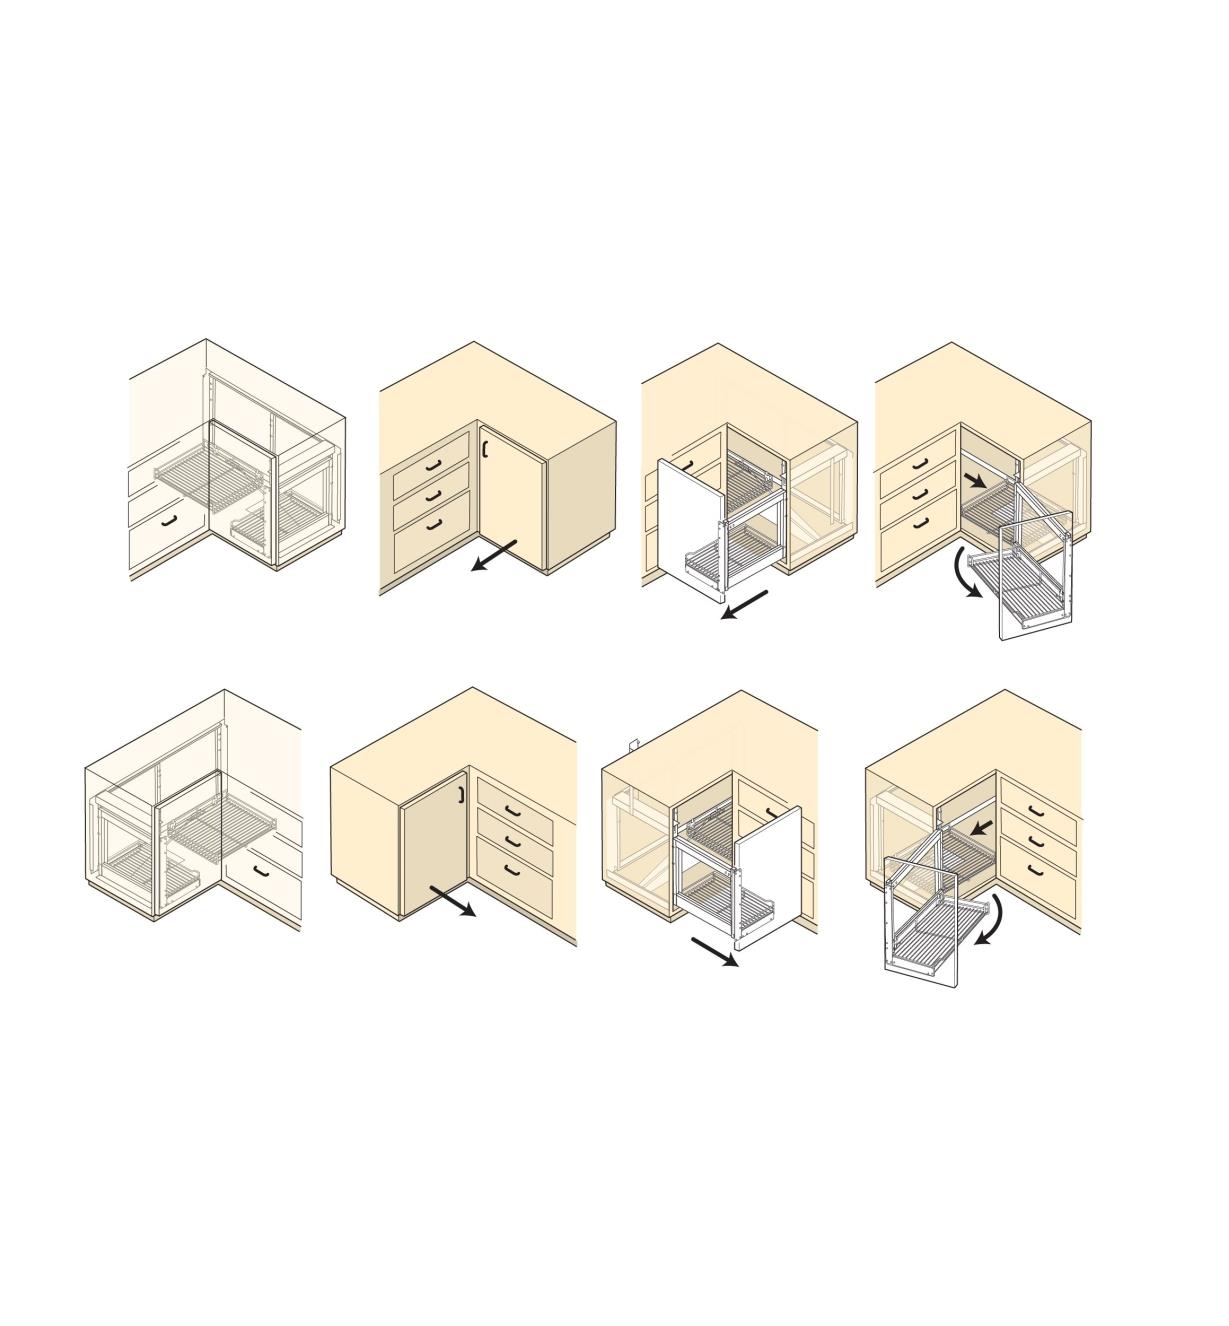 Illustrations show how installed unit pulls out and swings to the side